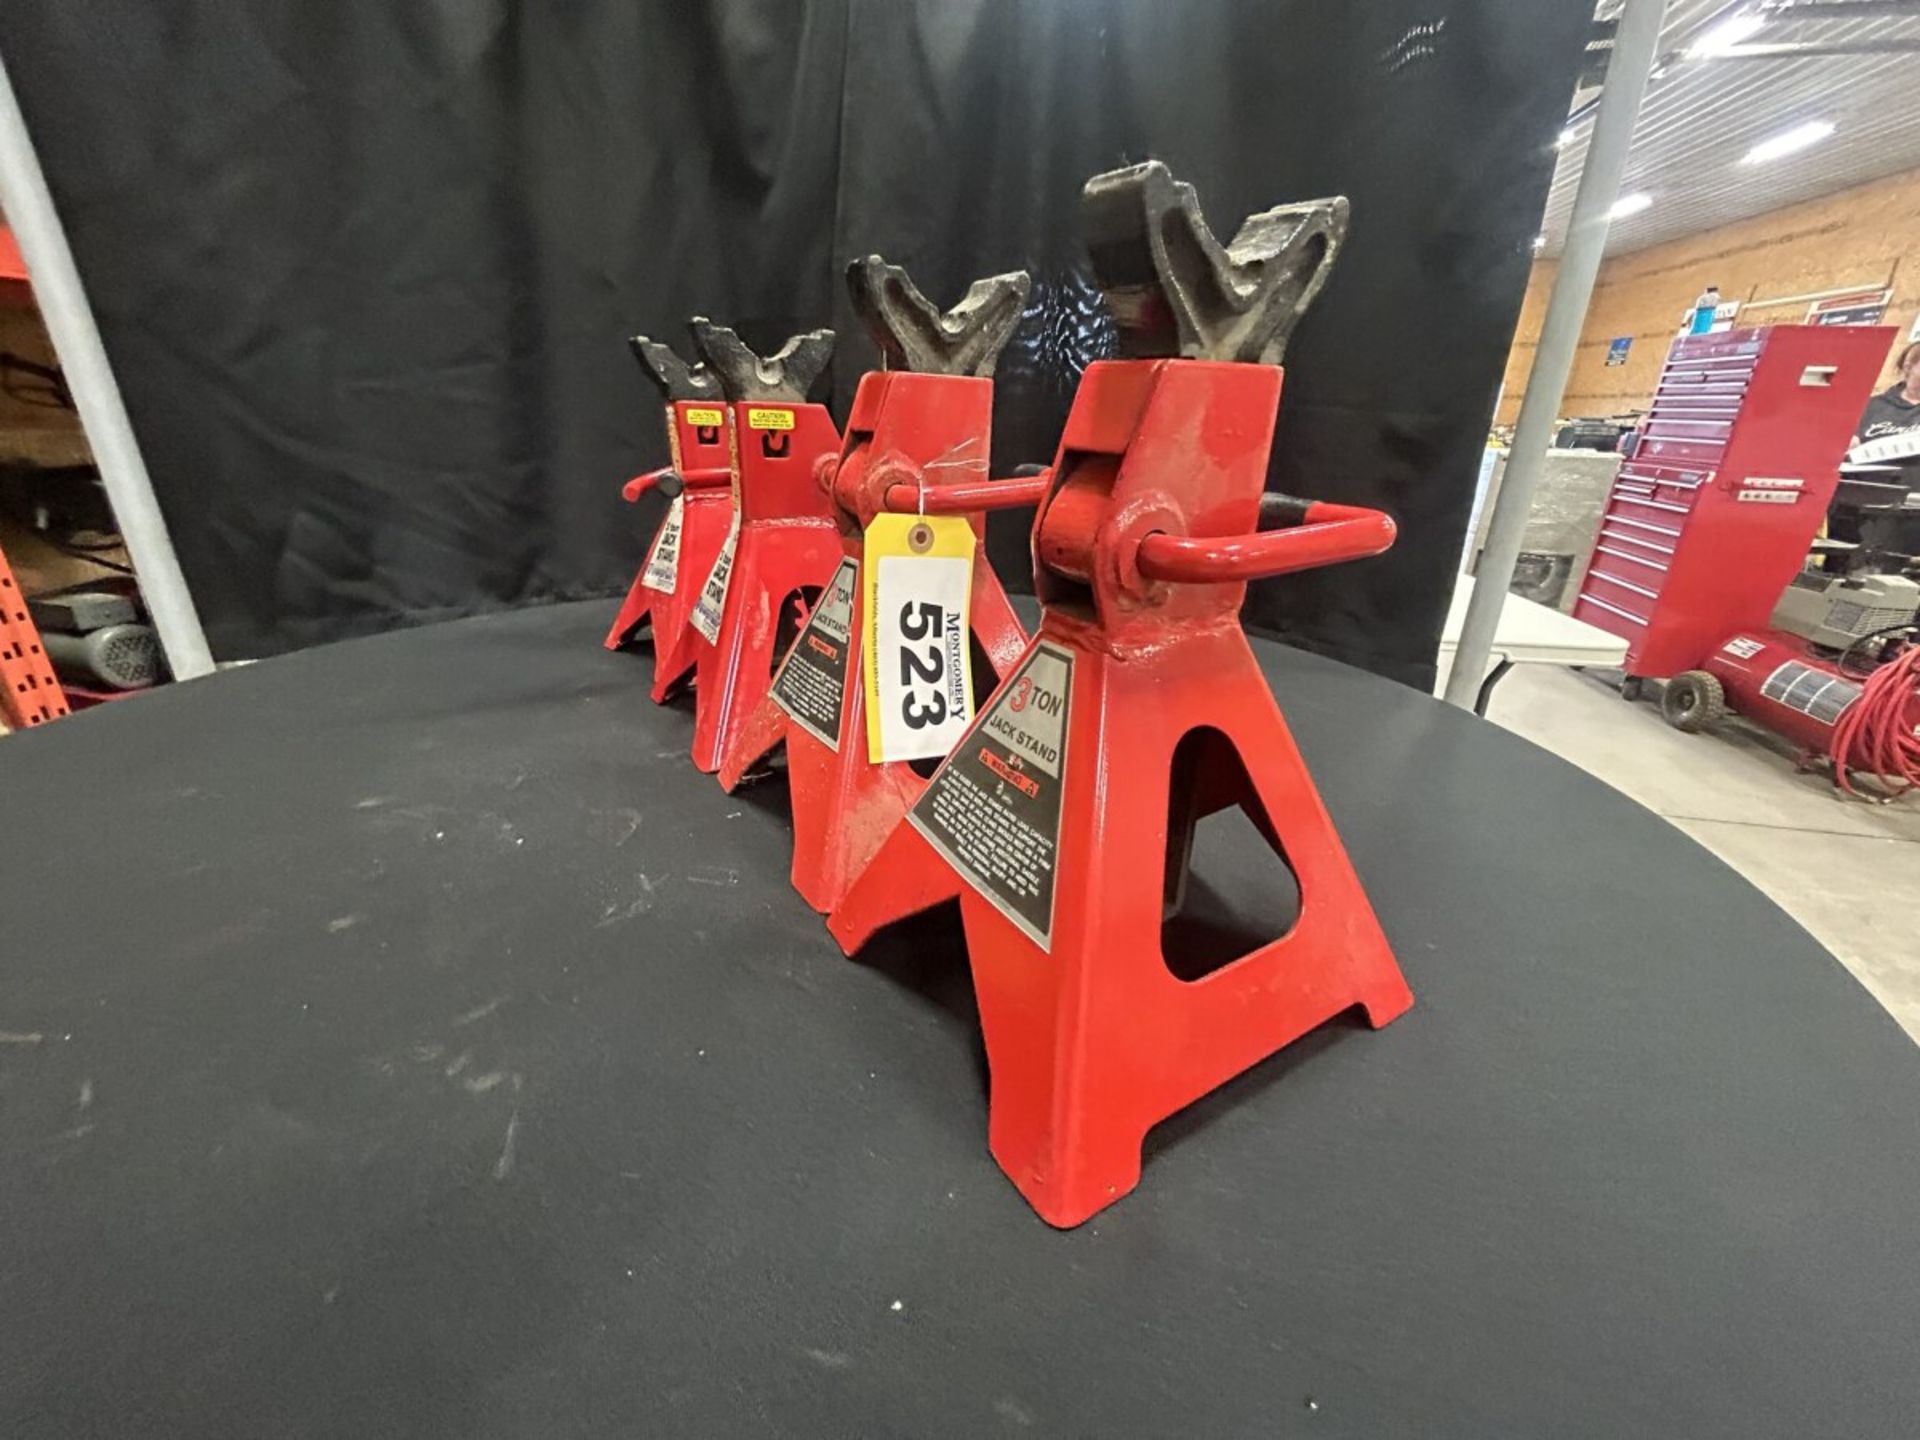 4-POWER LITE 3-TON JACK STANDS - Image 2 of 3